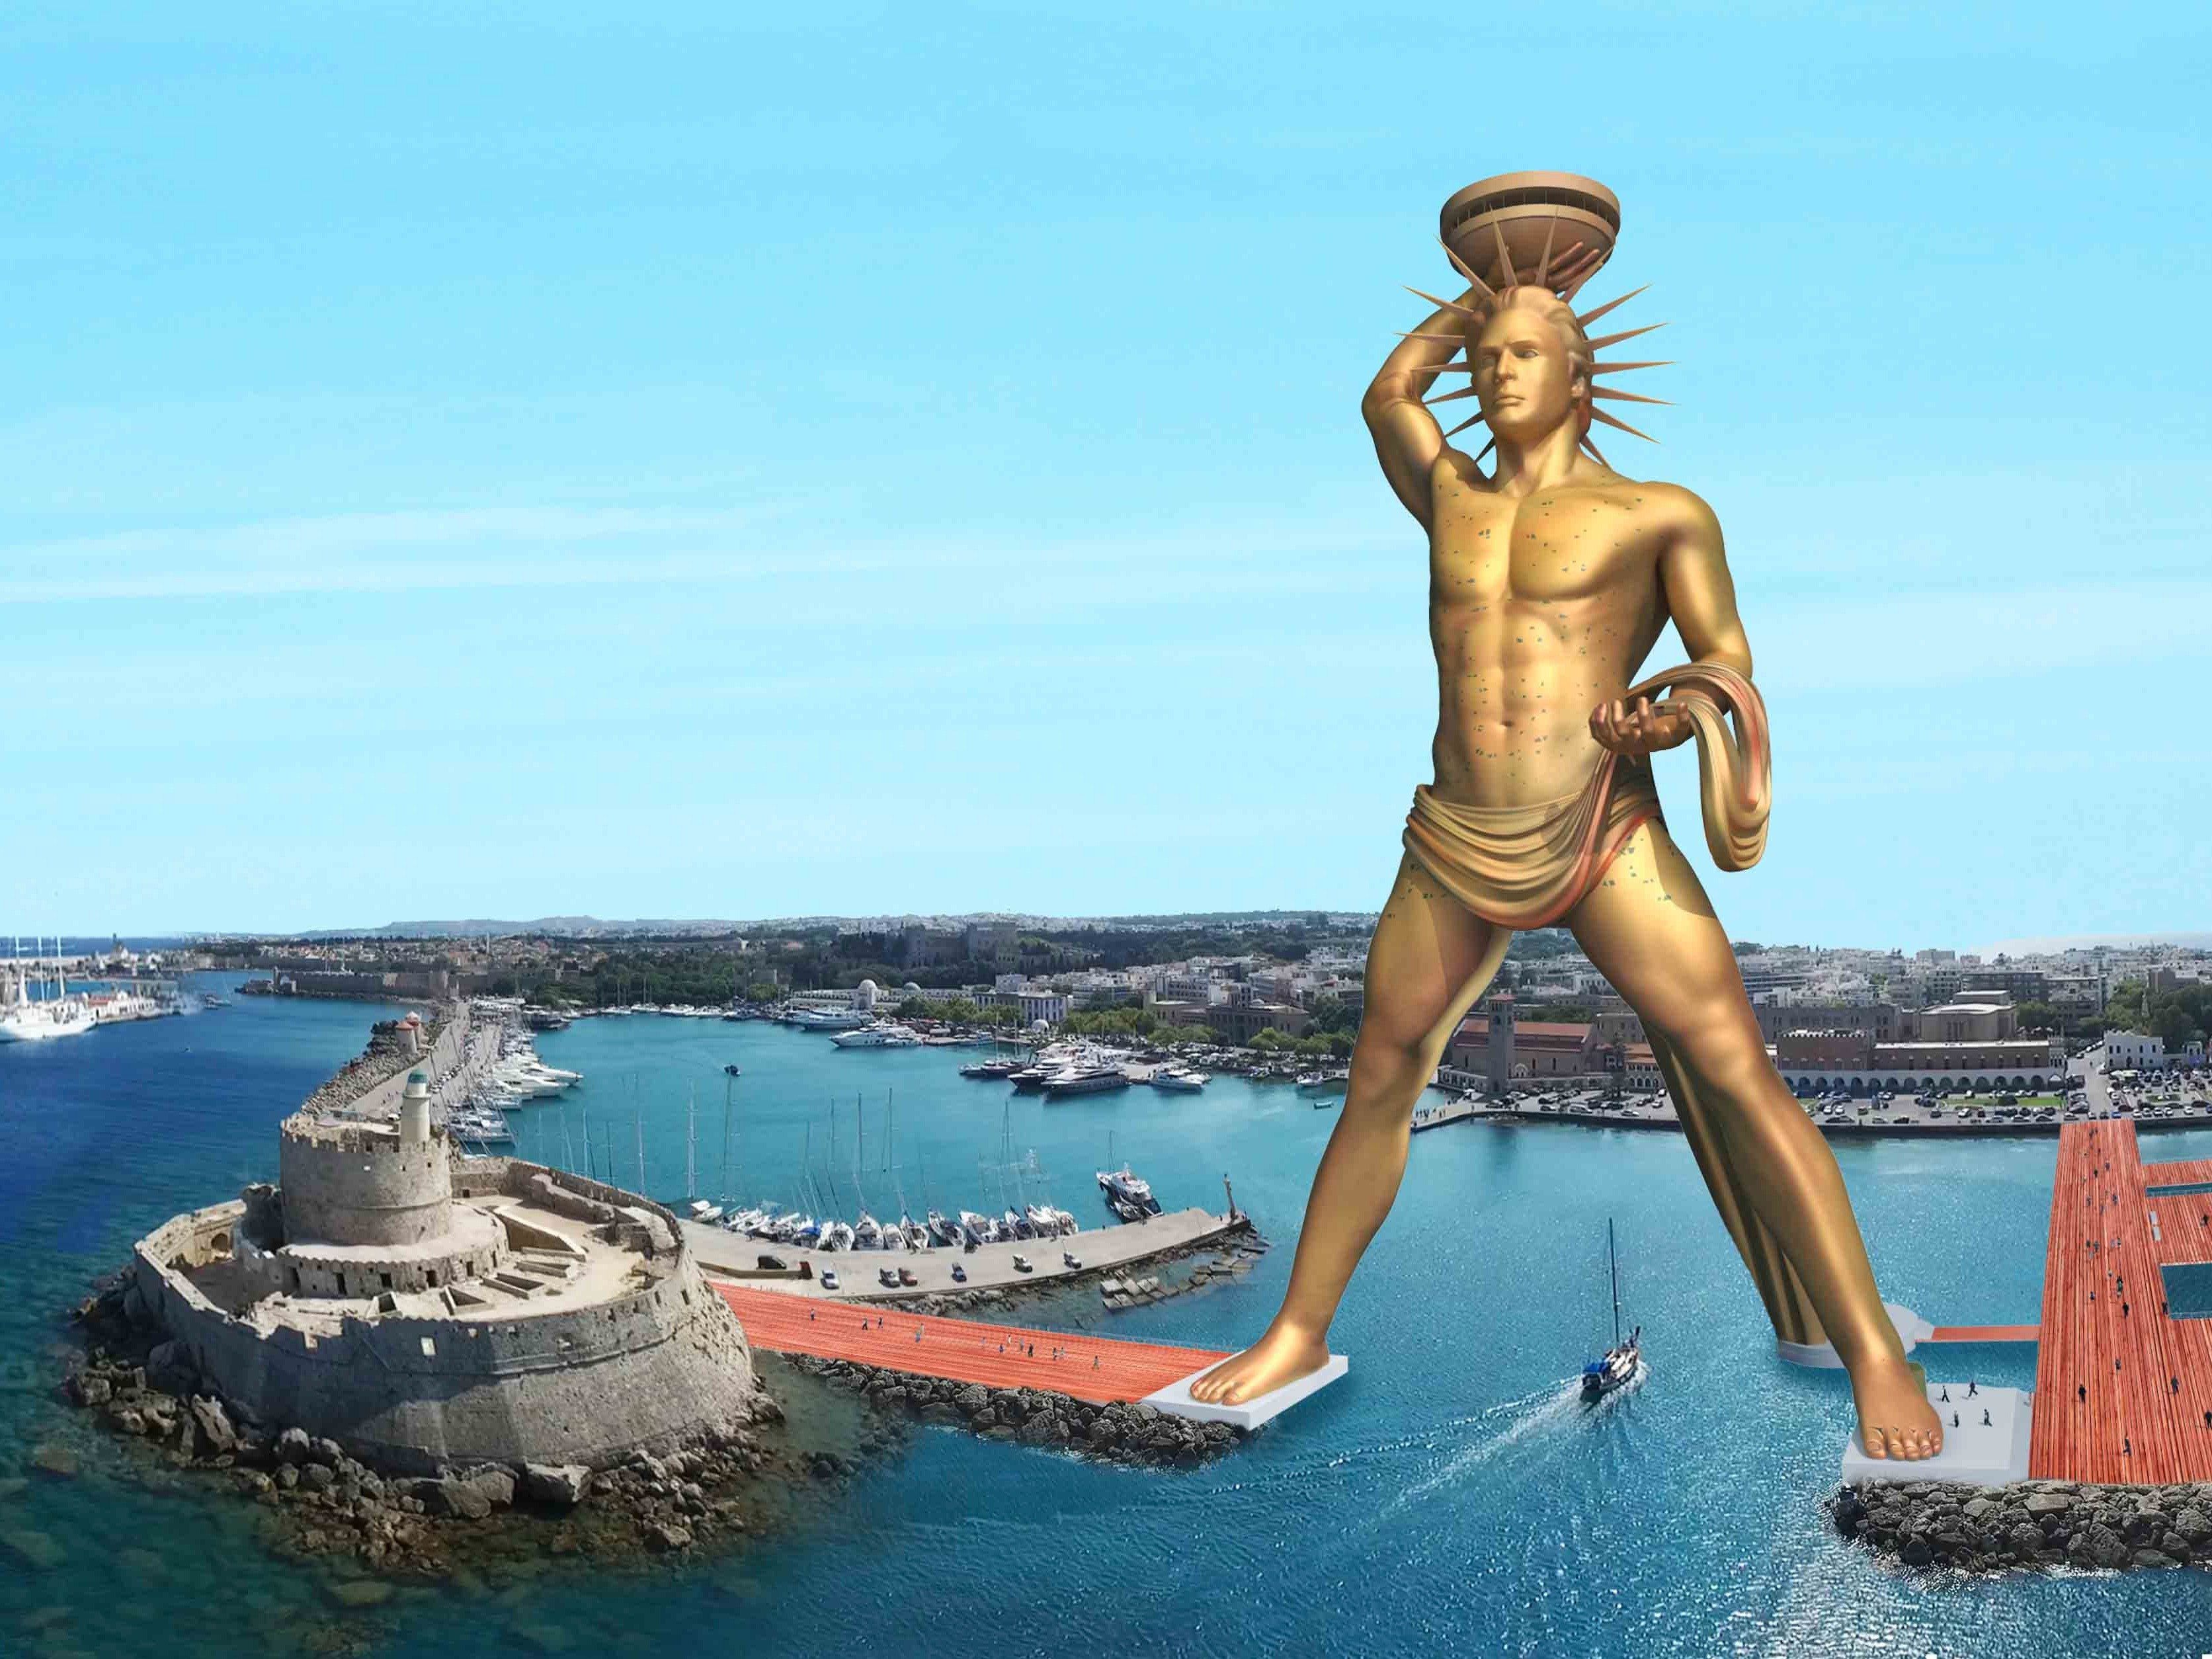 There's a Plan To Rebuild the Colossus of Rhodes